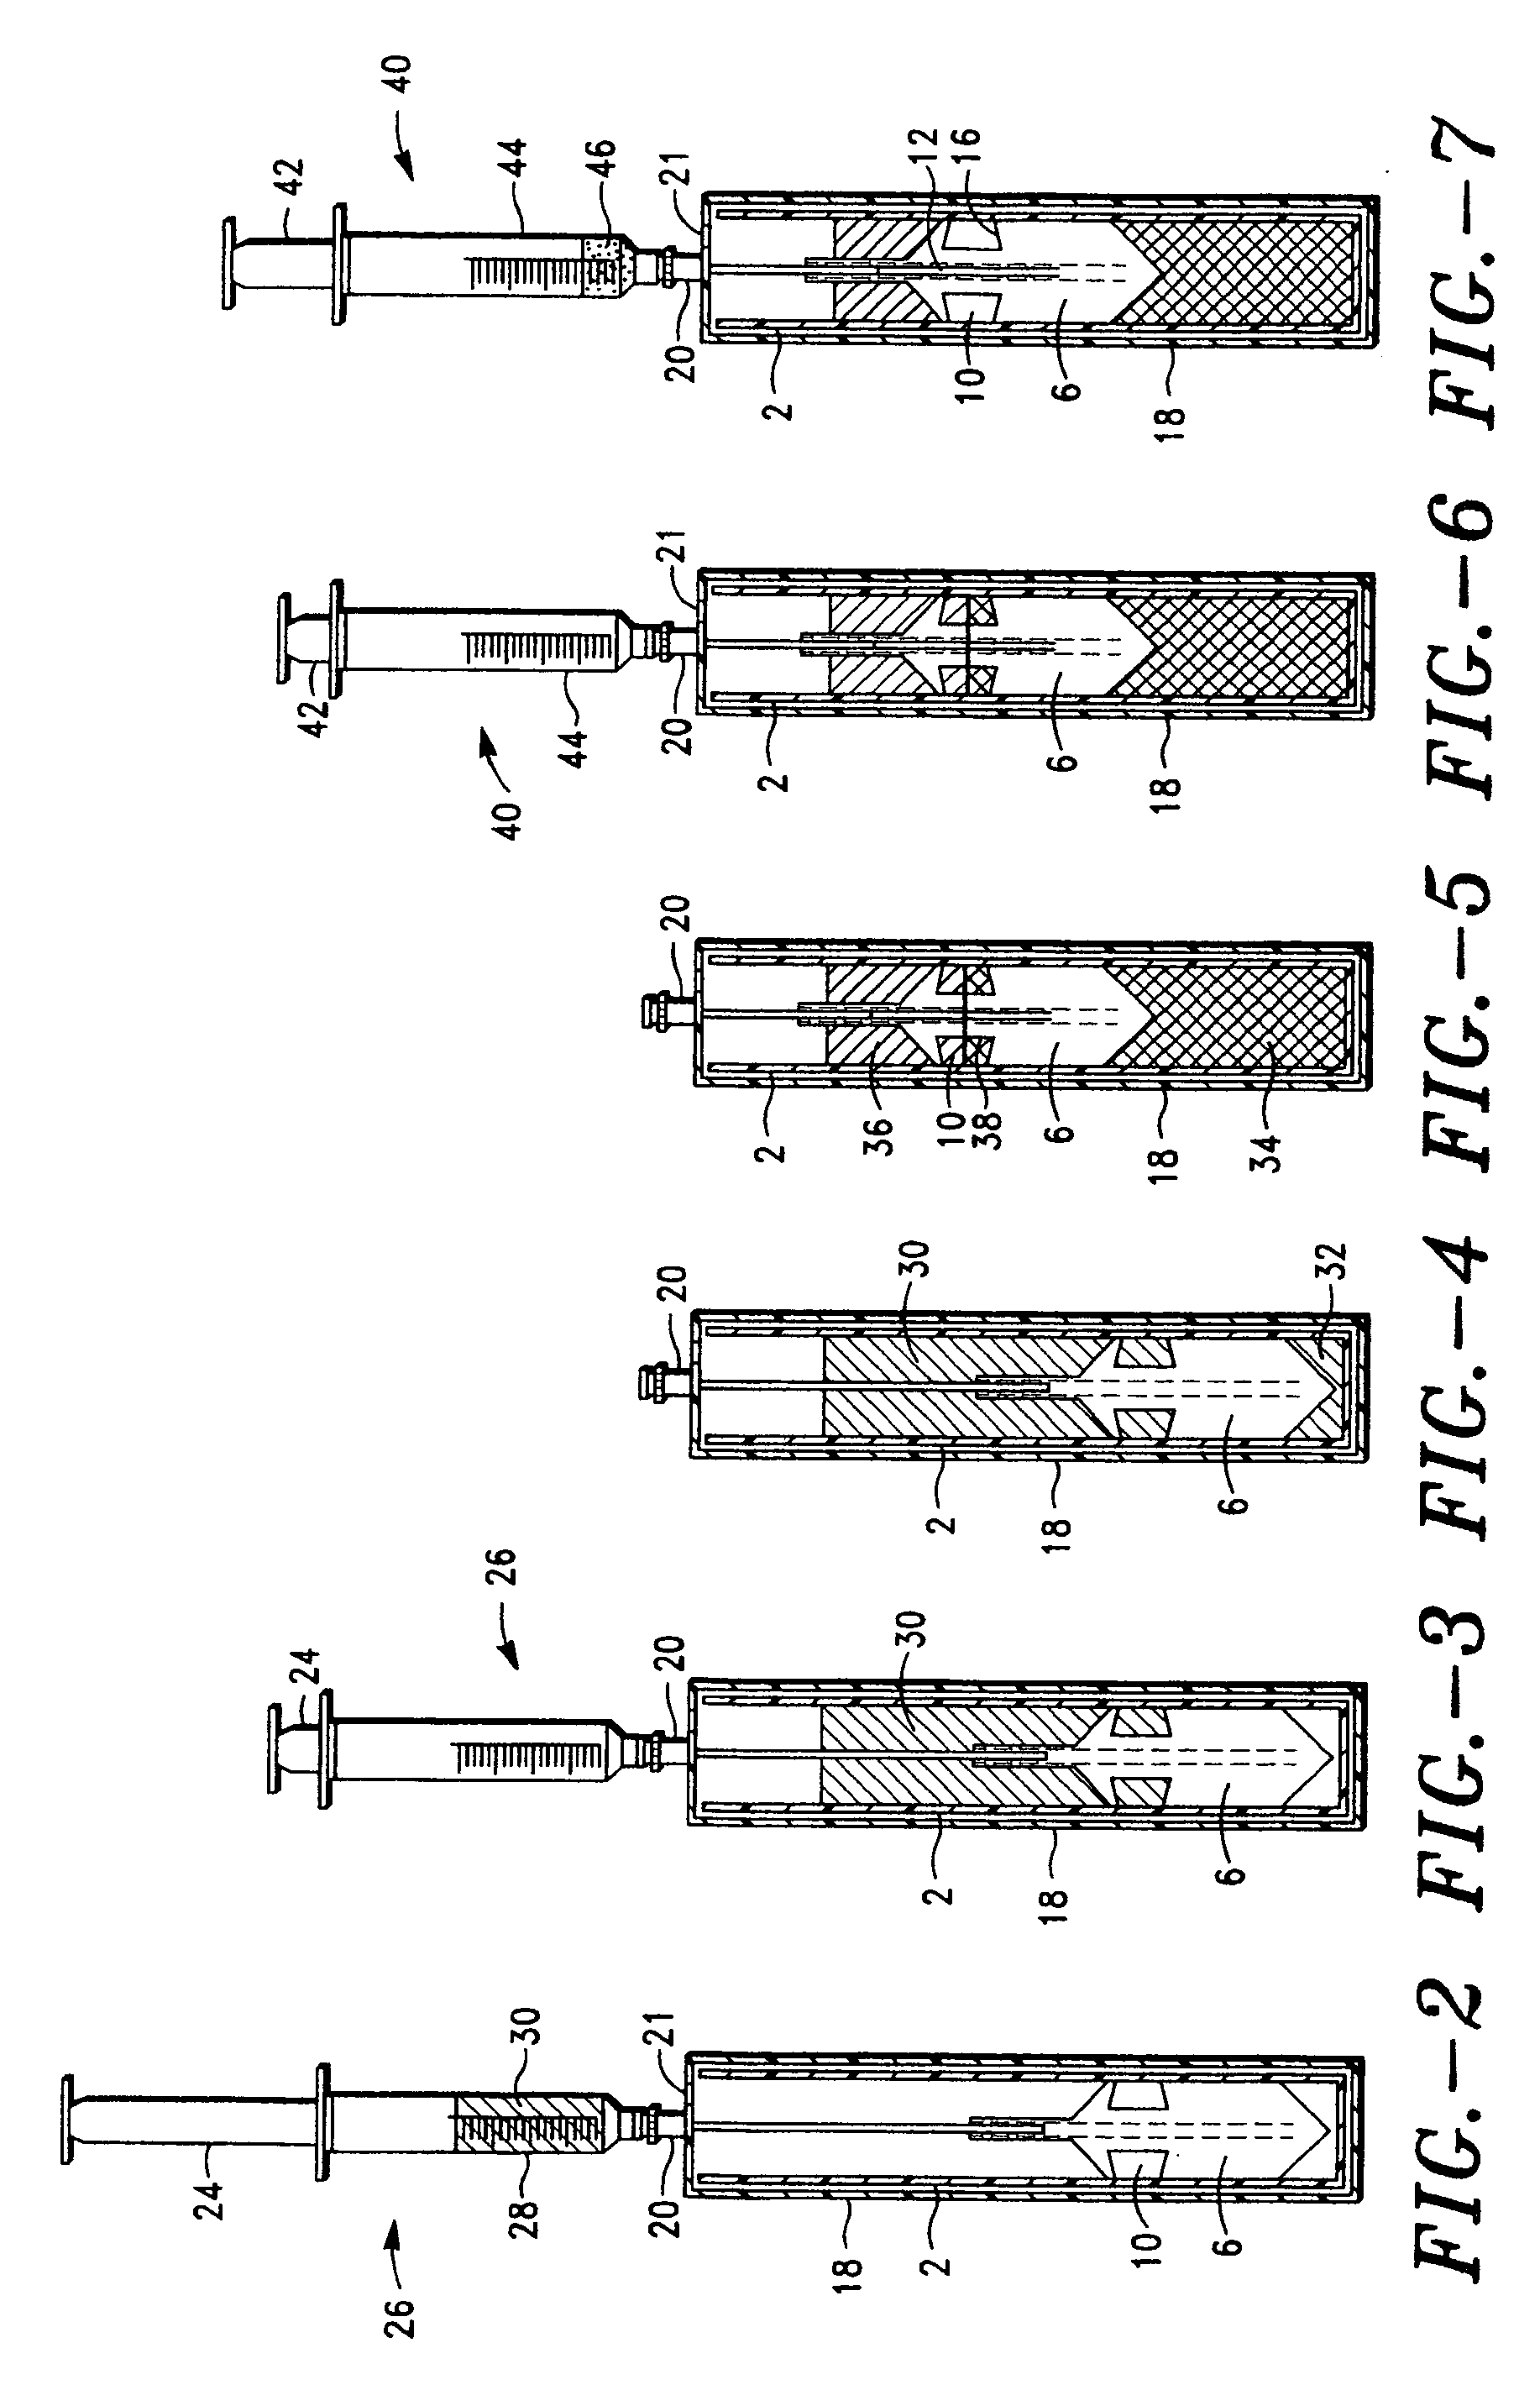 Methods and apparatus for isolating platelets from blood